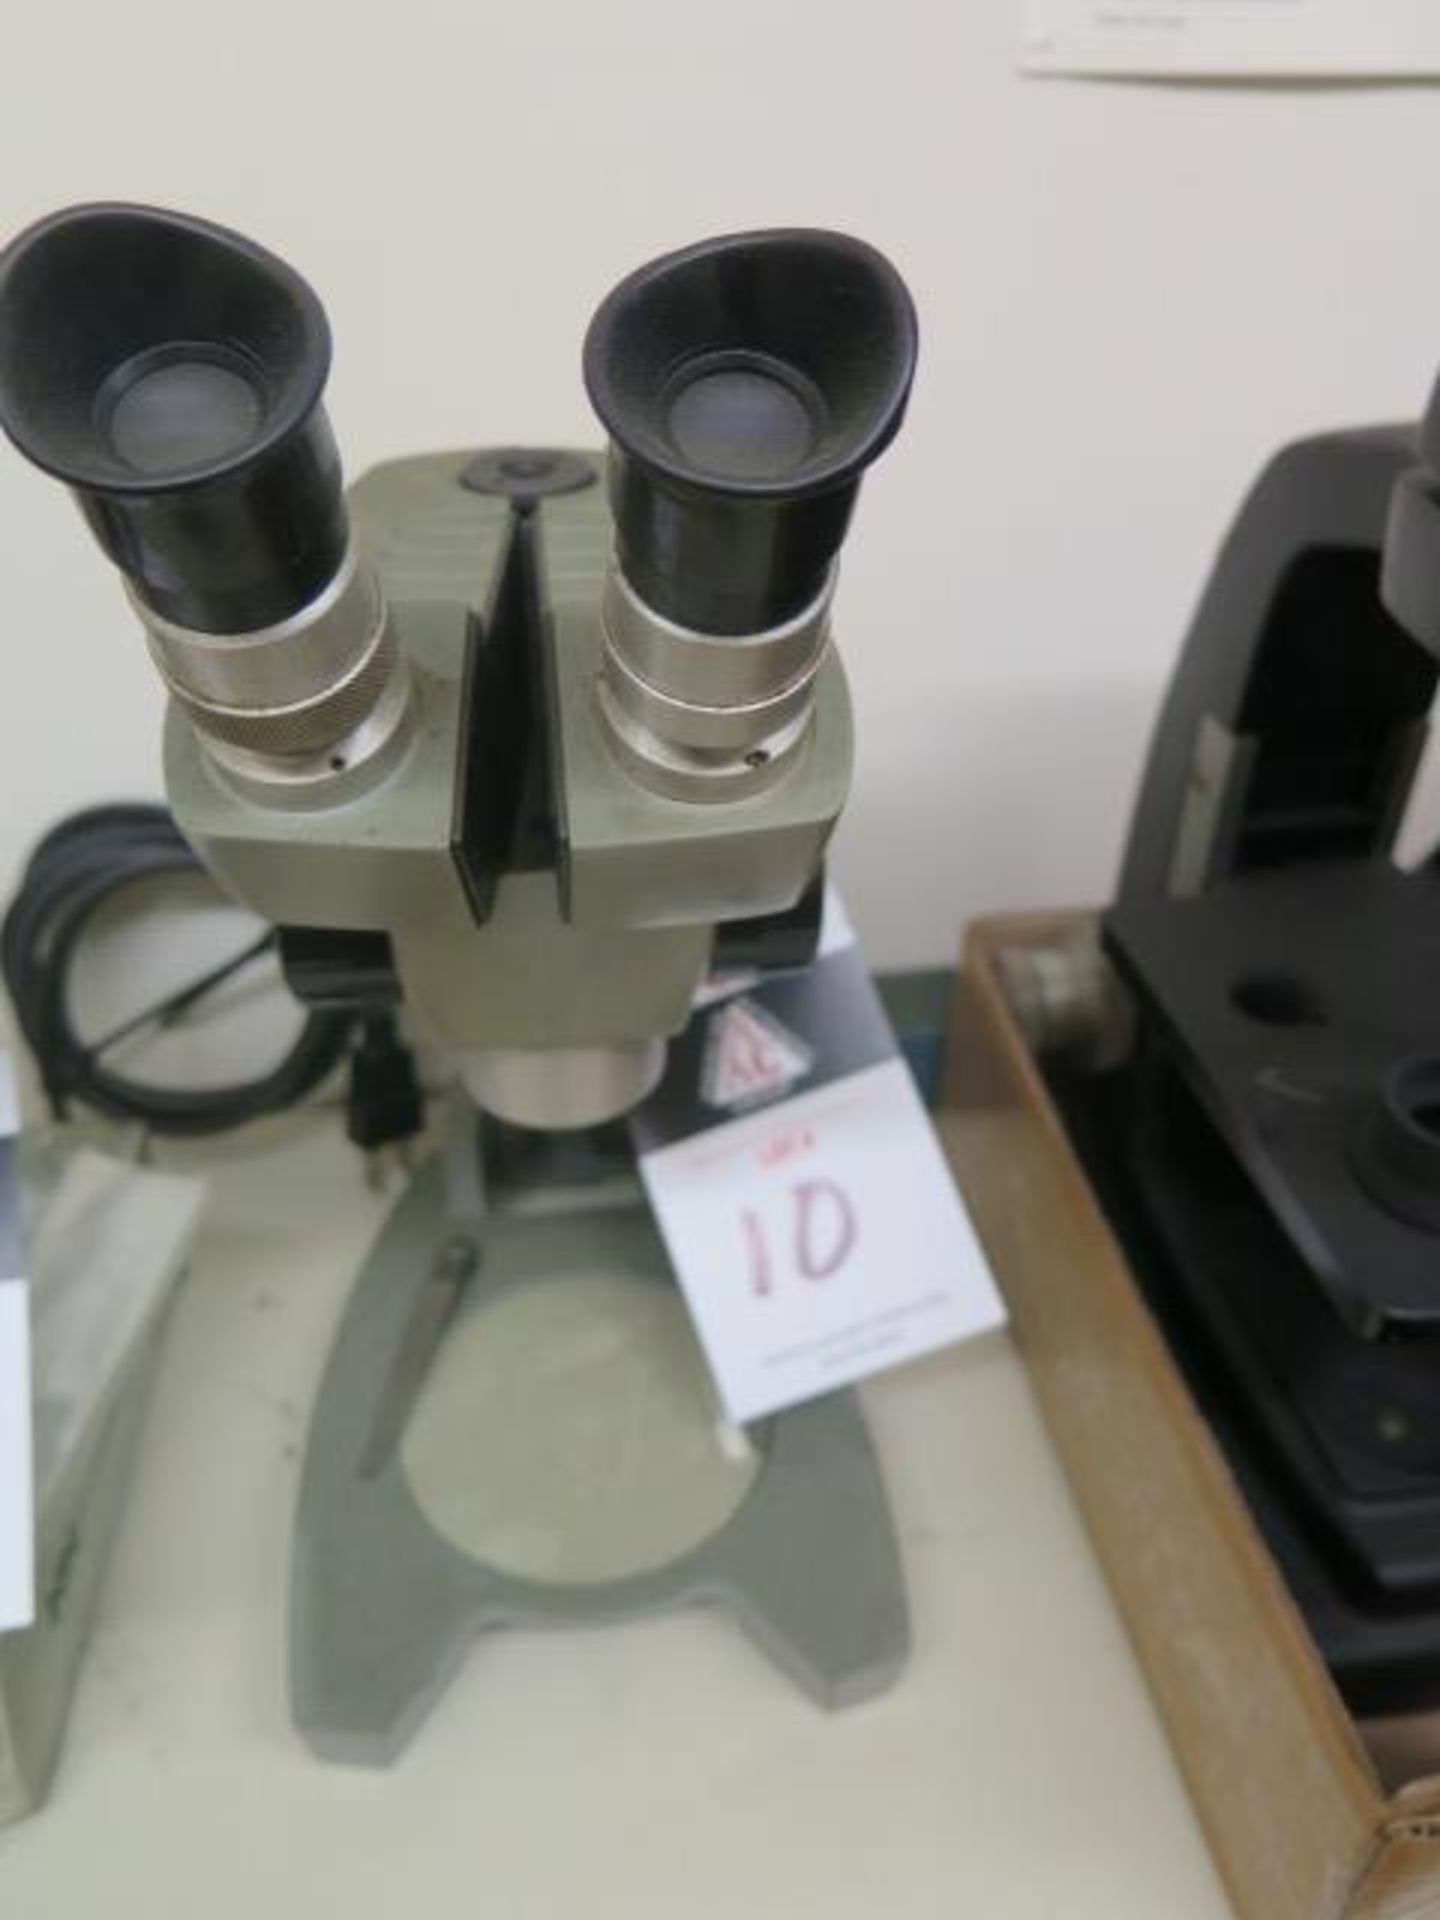 AO Stereo Microscope w/ Light Source (SOLD AS-IS - NO WARRANTY)